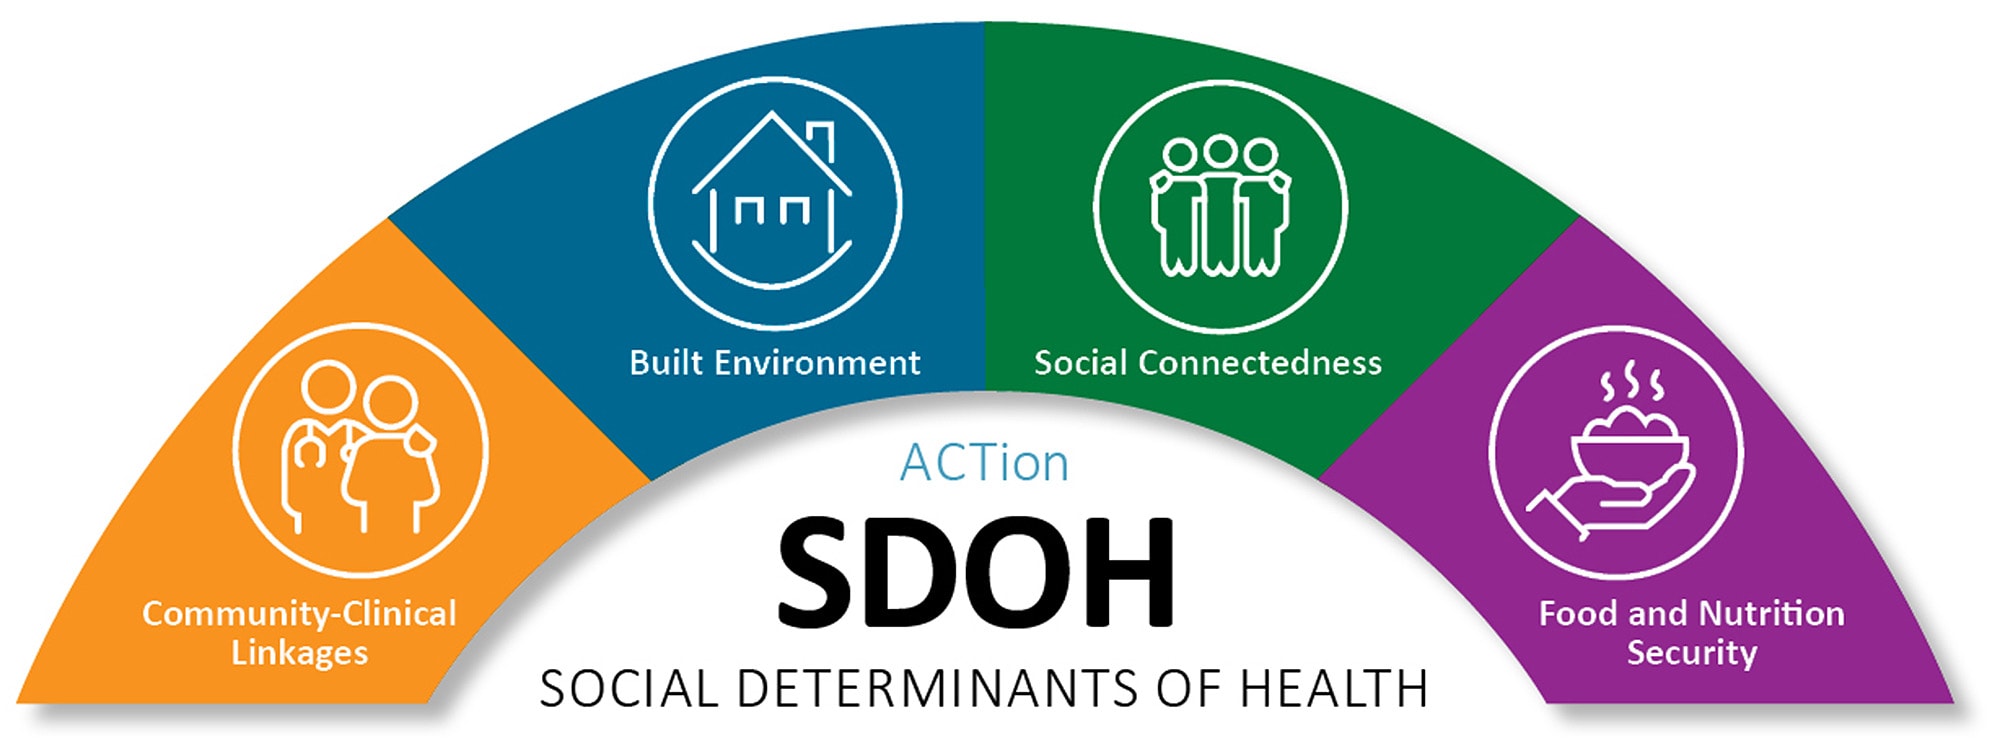 Rainbow graphic depicting the four NCCDPHP SDOH domains for the Social Determinants of Health ACTion plan.